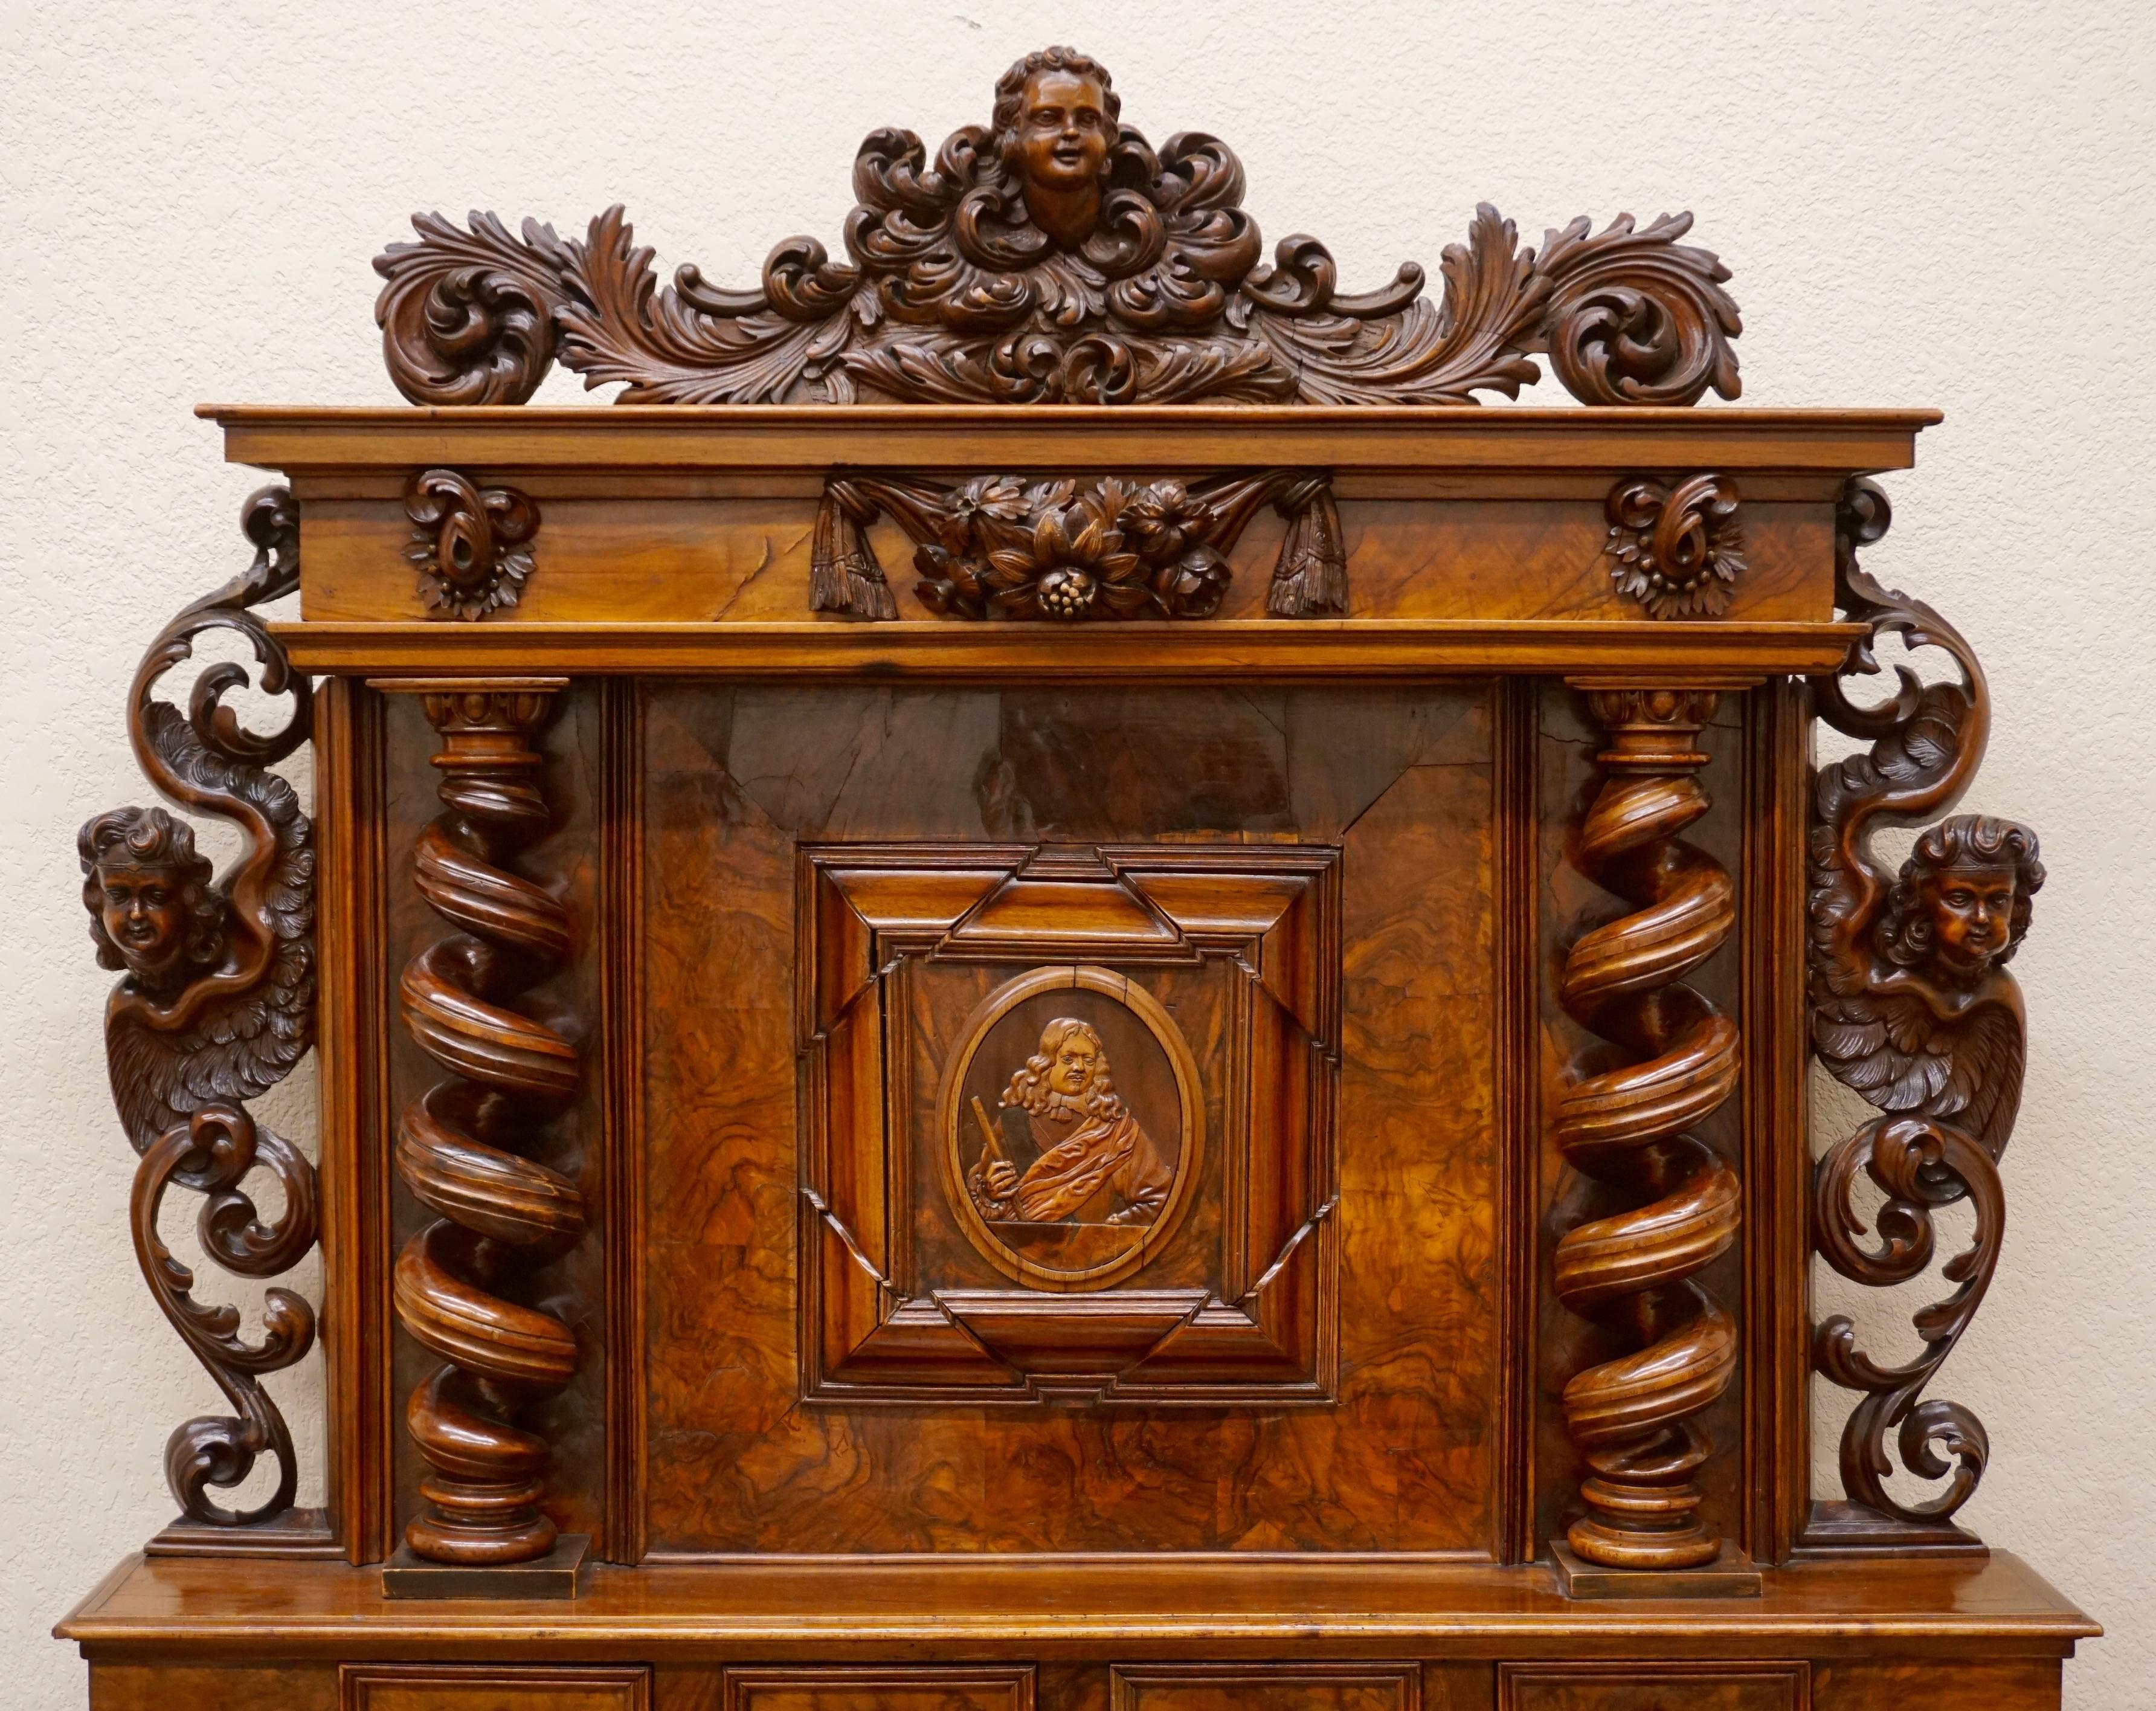 Baroque 17th Century Louis XIII Burl Walnut Sideboard Cabinet with Carved Portrait